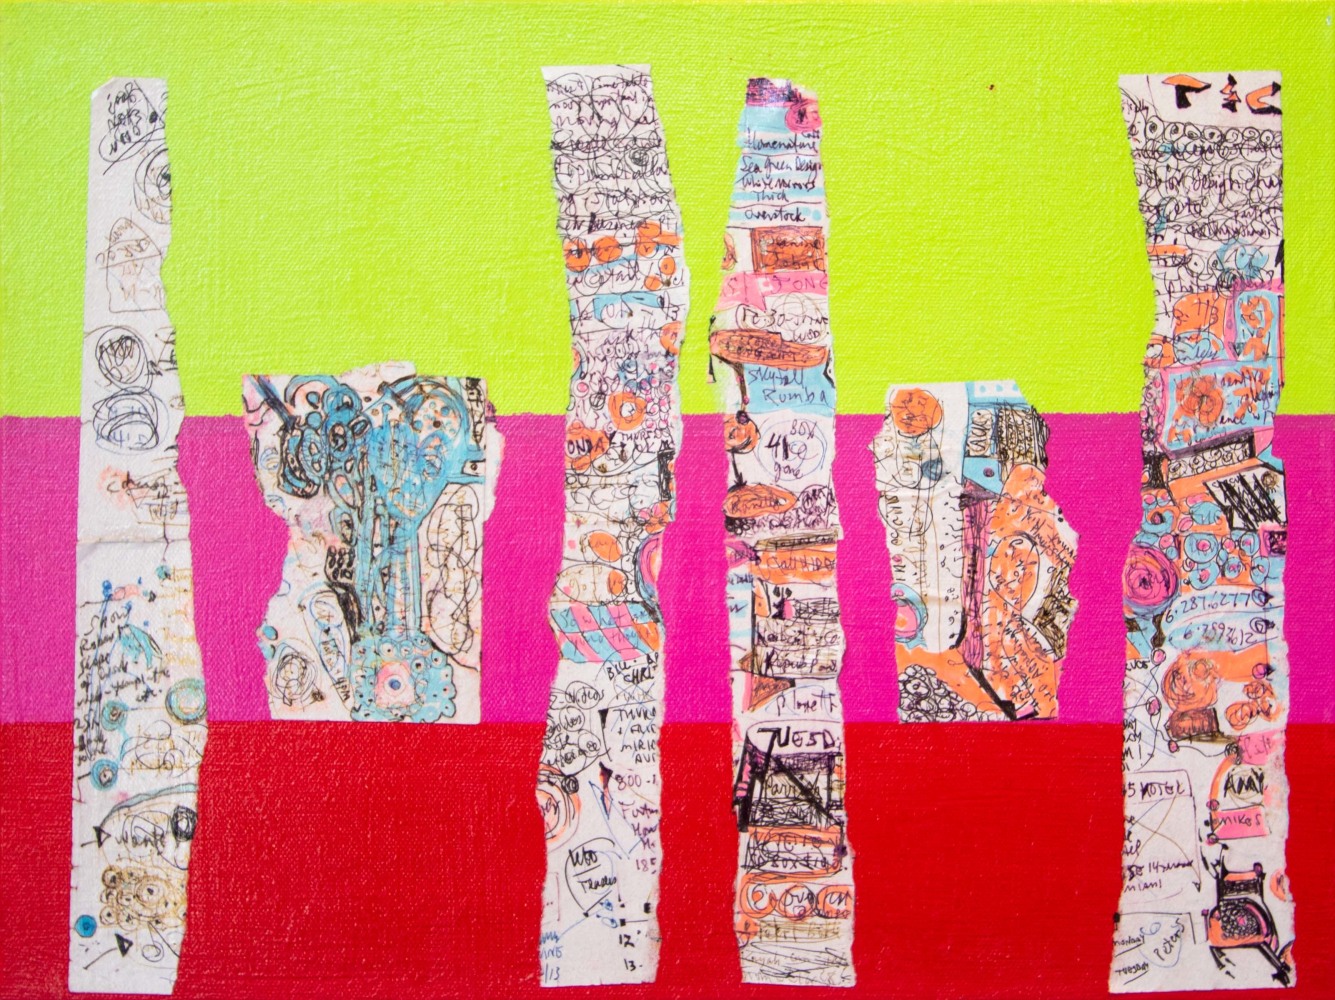 Ron Burkhardt, NOTISM- &quot;Spires&quot; 2013. Acrylics, Pen and Ink on Paper Collaged on Canvas, 12 x 16 inches